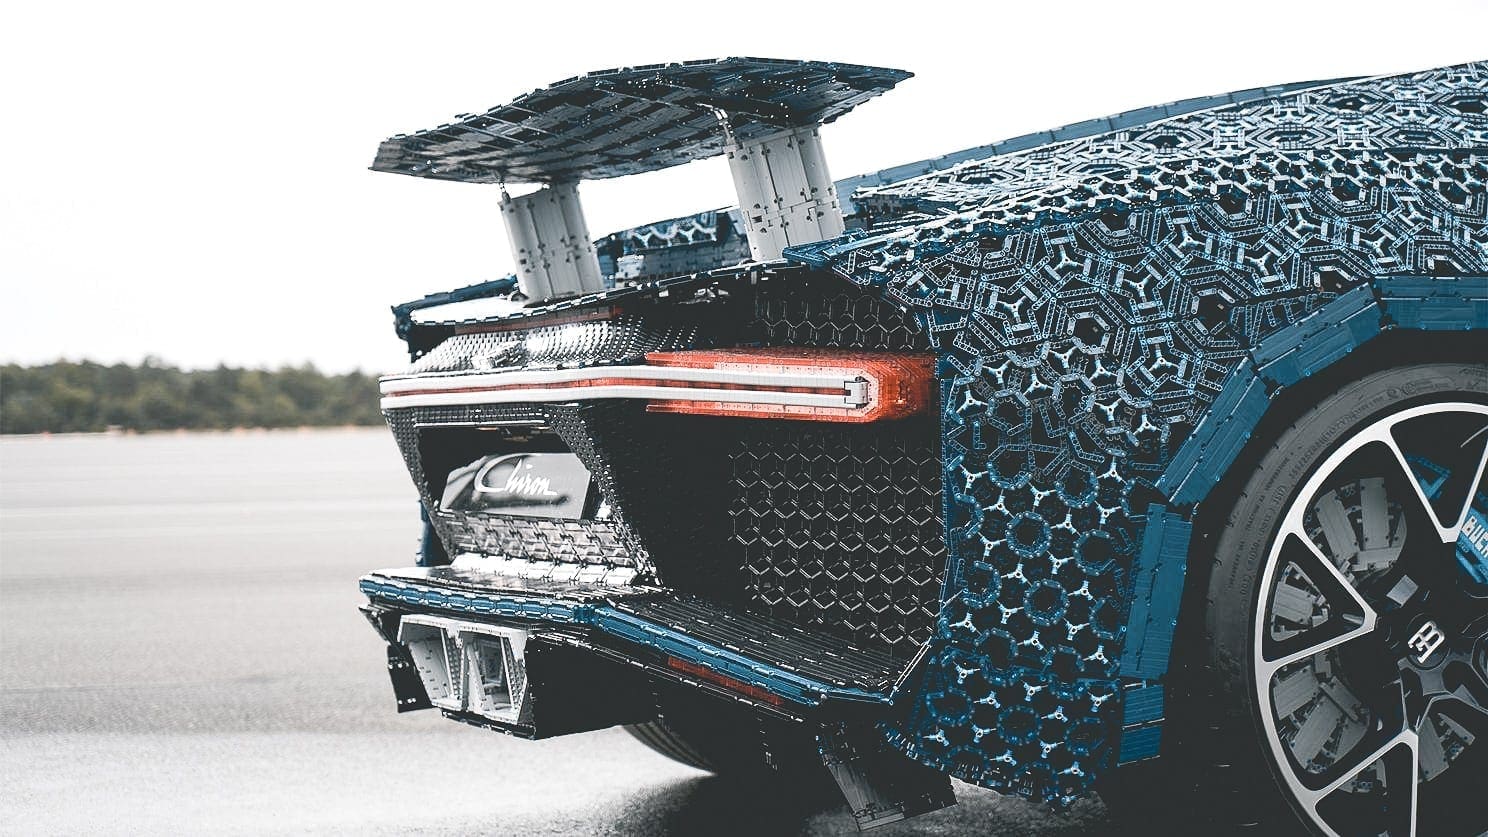 https://www.lego.com/nl-nl/themes/technic/bugatti-chiron/build-for-real?icmp=COXXXXHomeMSXTechnicProduct42083BuildForReal